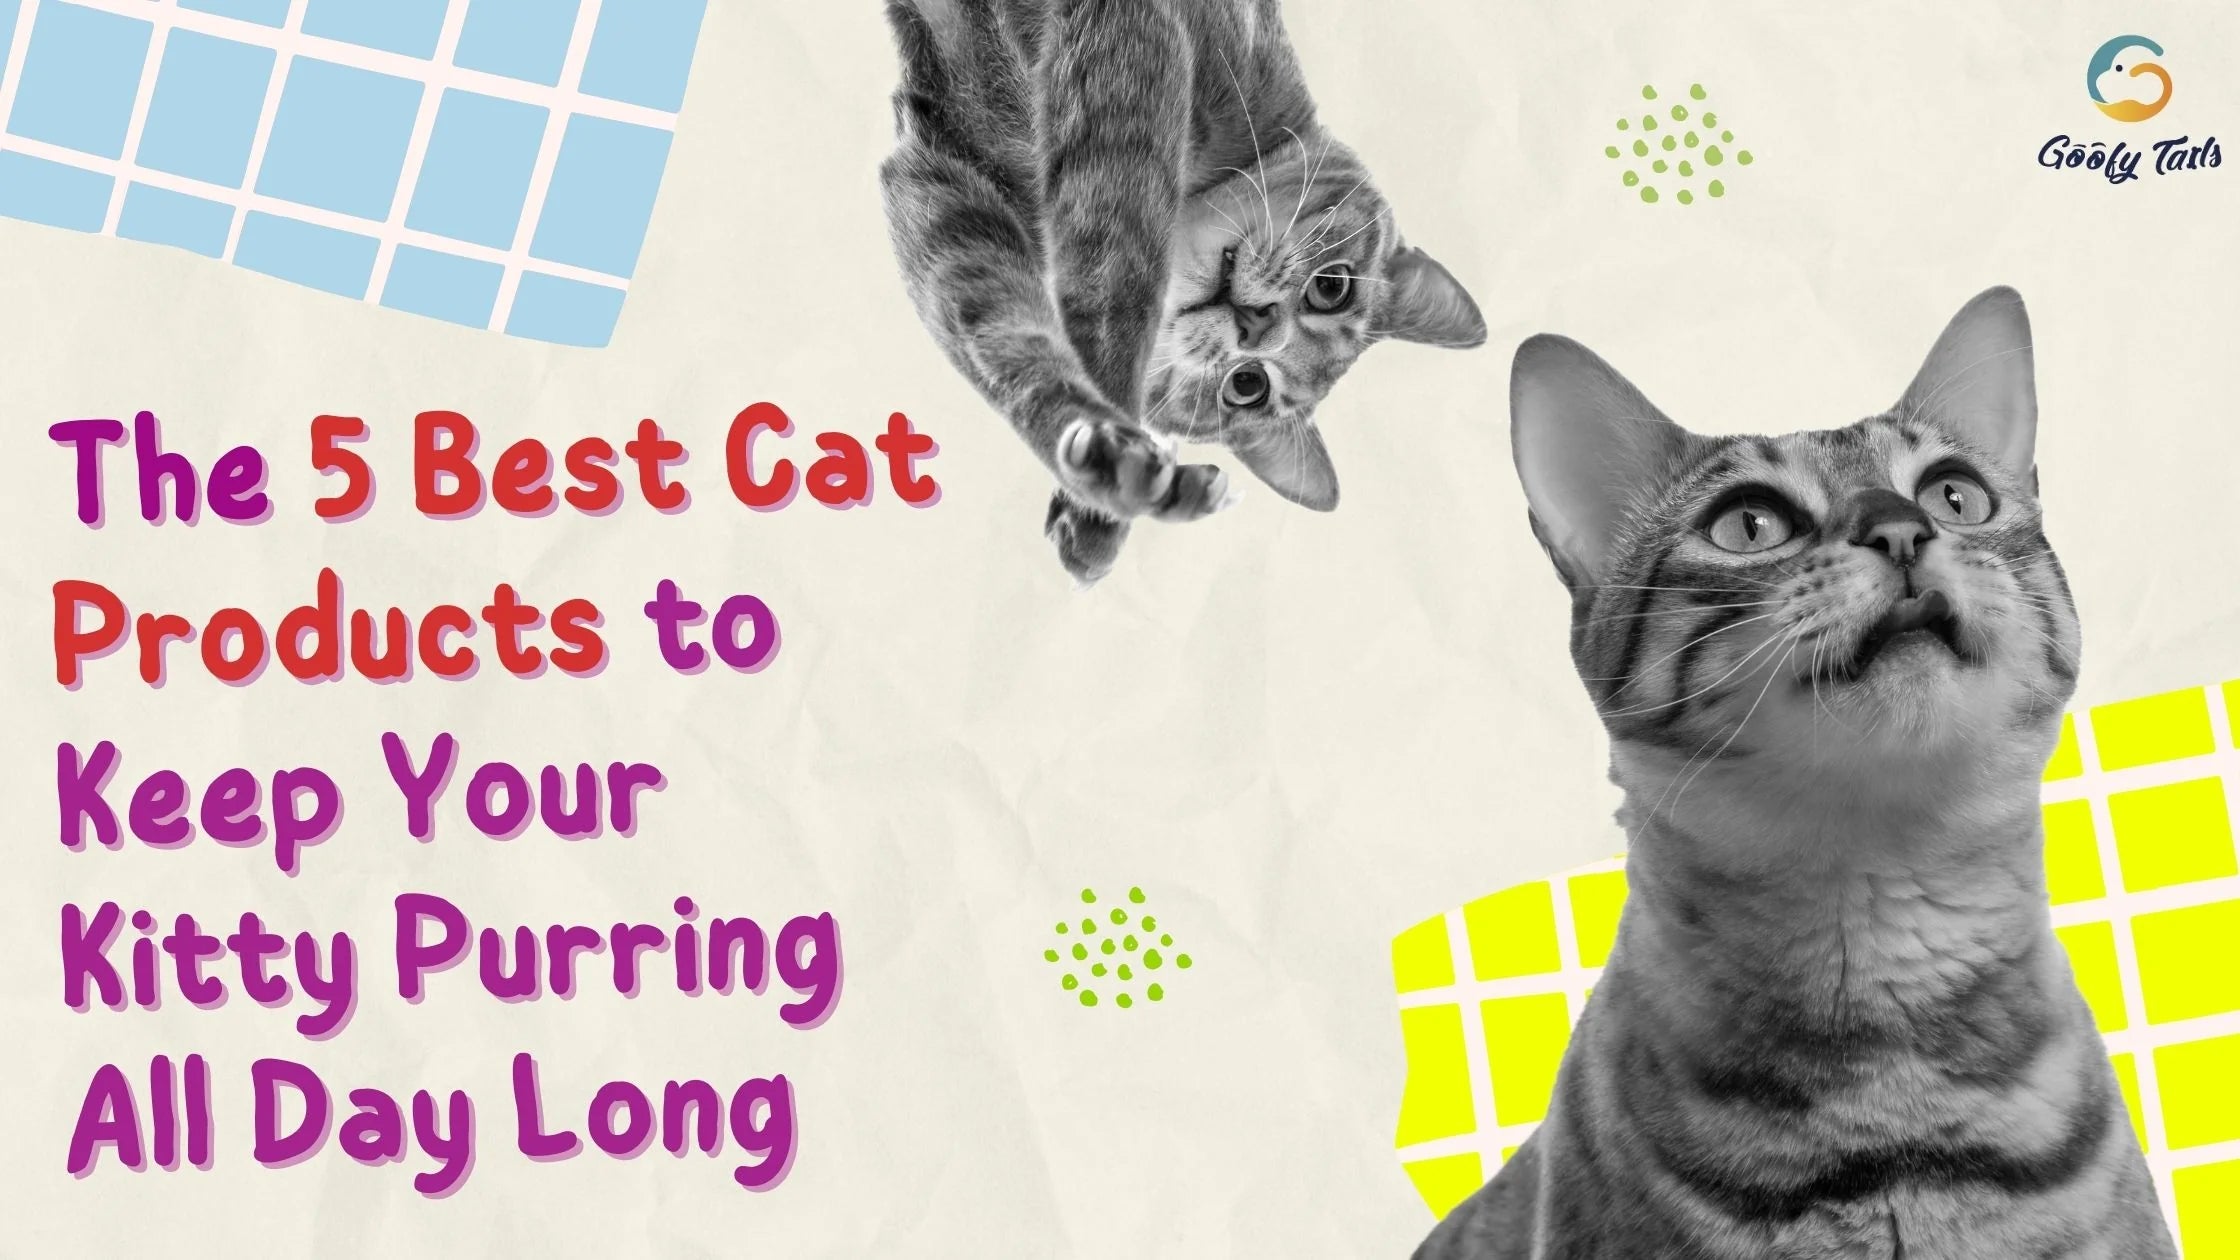 The 5 Best Cat Products to Keep Your Kitty Purring All Day Long blog banner